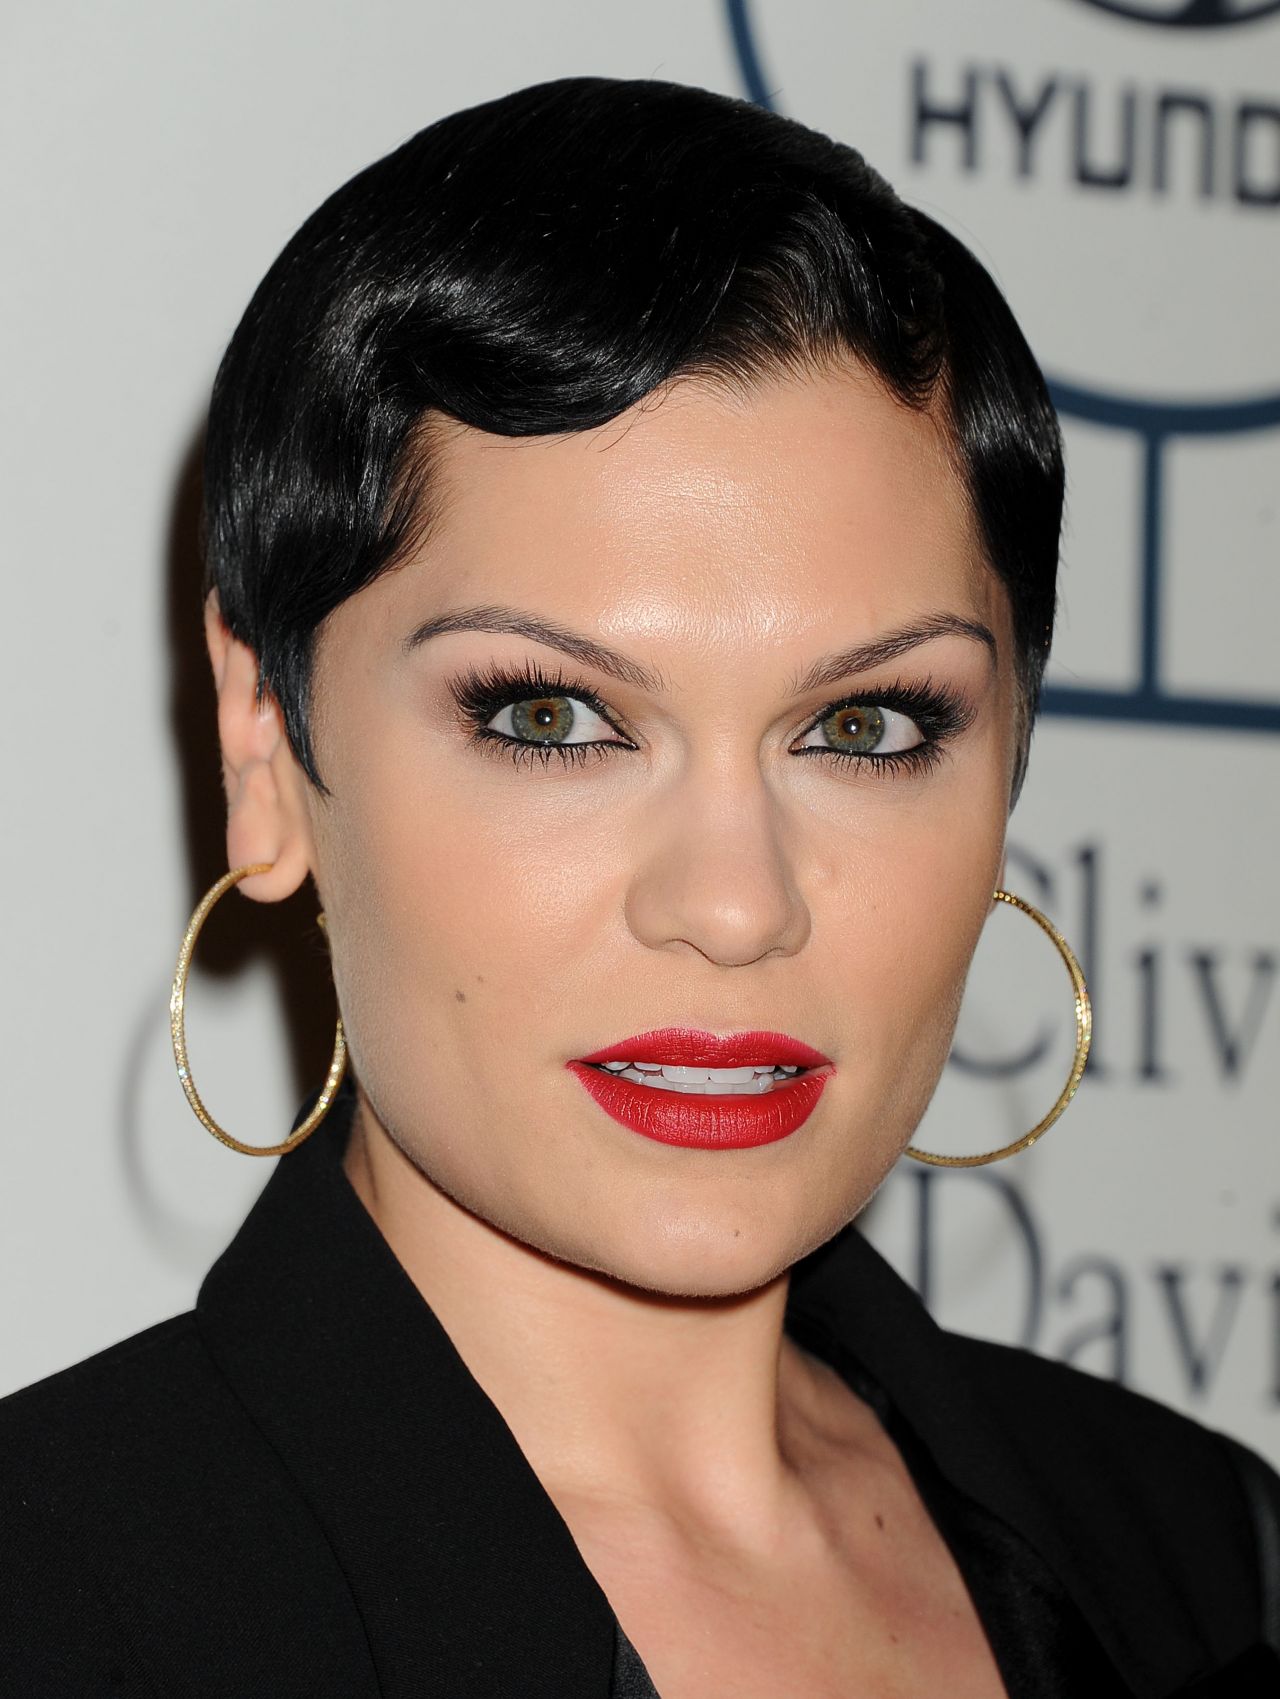 Watch Jessie J's powerful cover of On My Own from Les Miserables